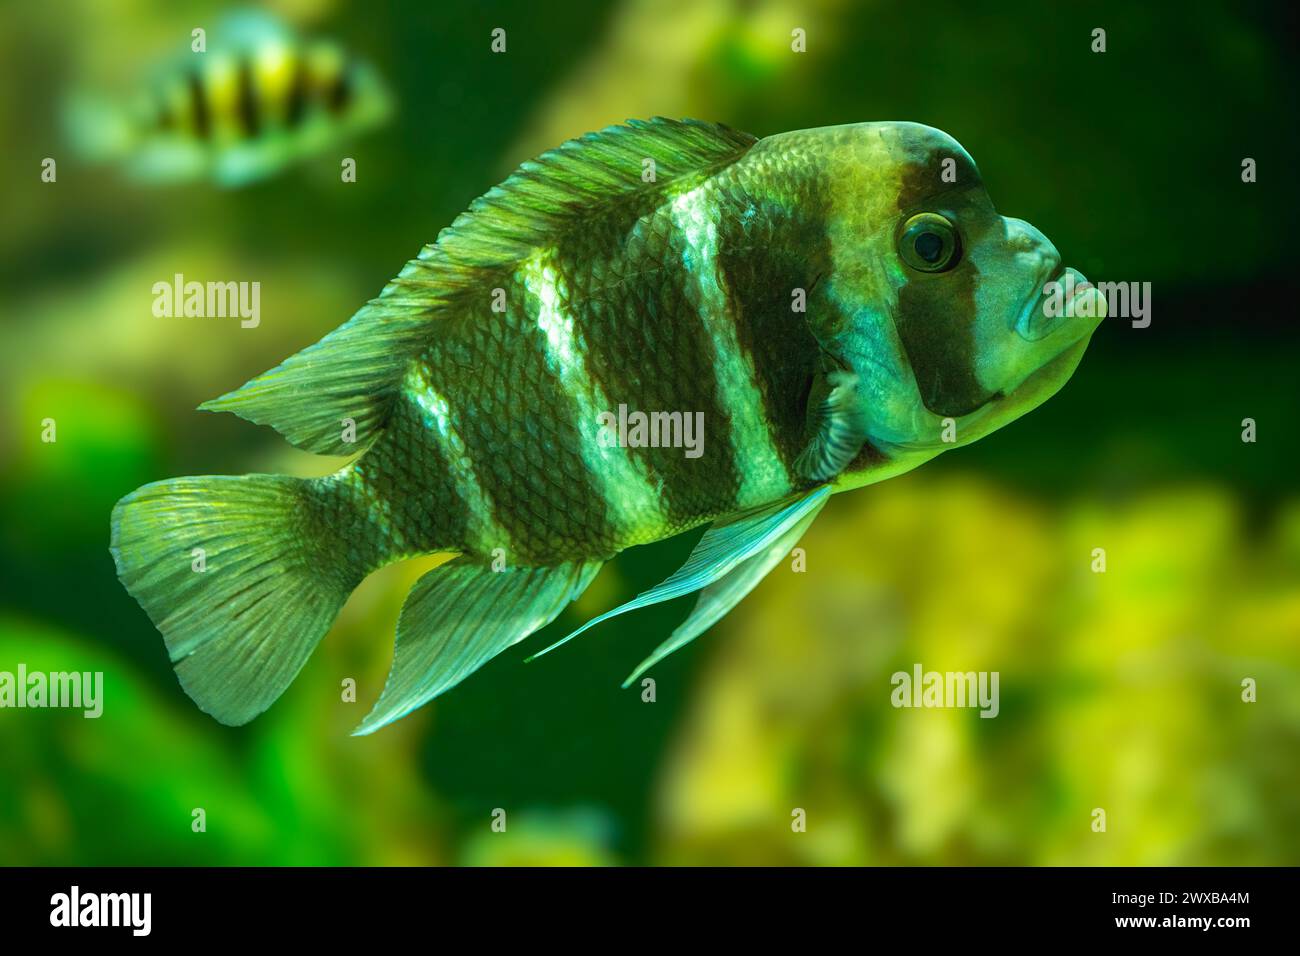 Cyphotilapia frontosa, also called the front cichlid and frontosa cichlid, is an east African species of fish endemic to Lake Tanganyika. Stock Photo